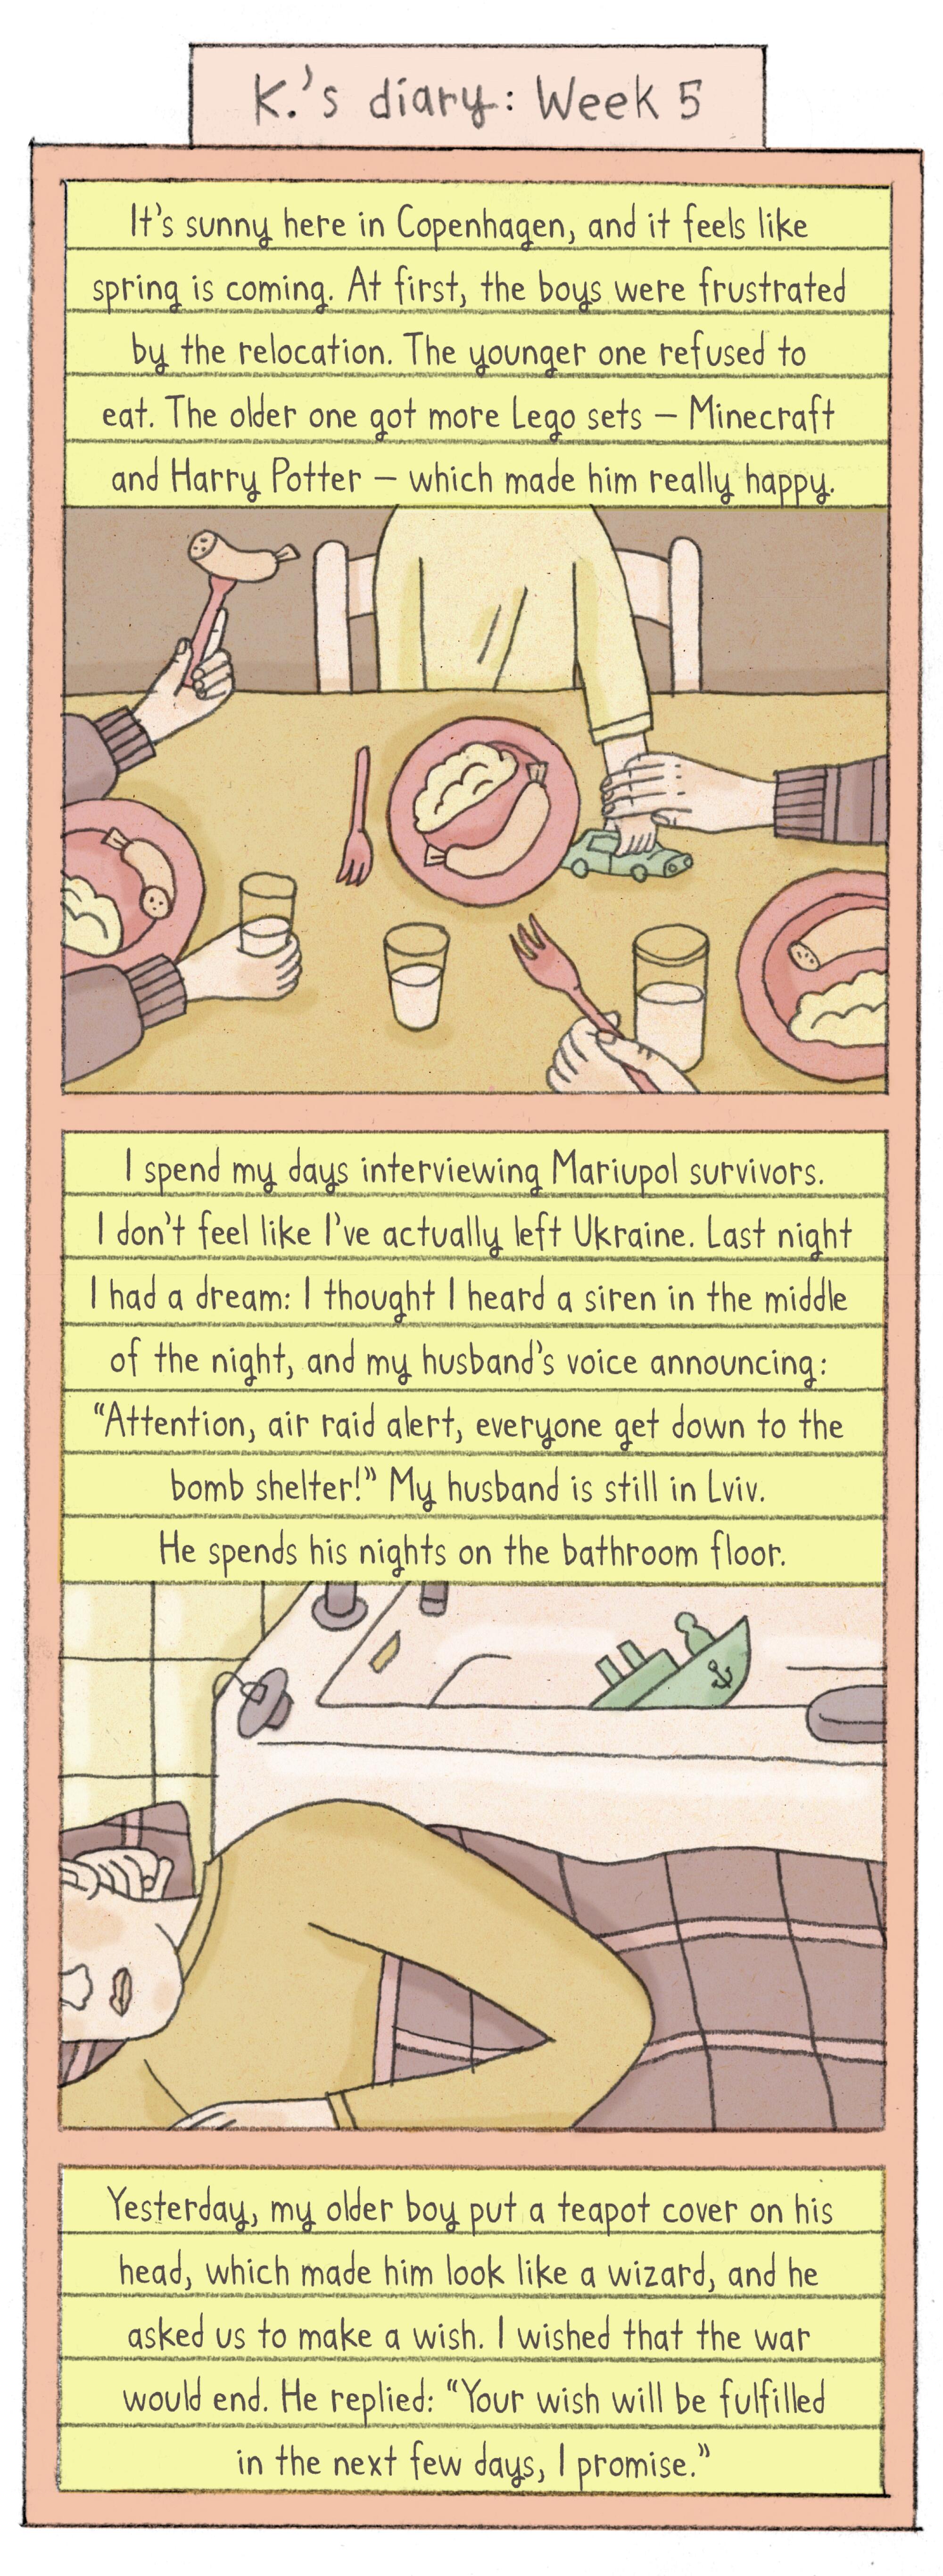 comic depicts a family eating dinner, lower panel shows the husband sleeping on bathroom floor.